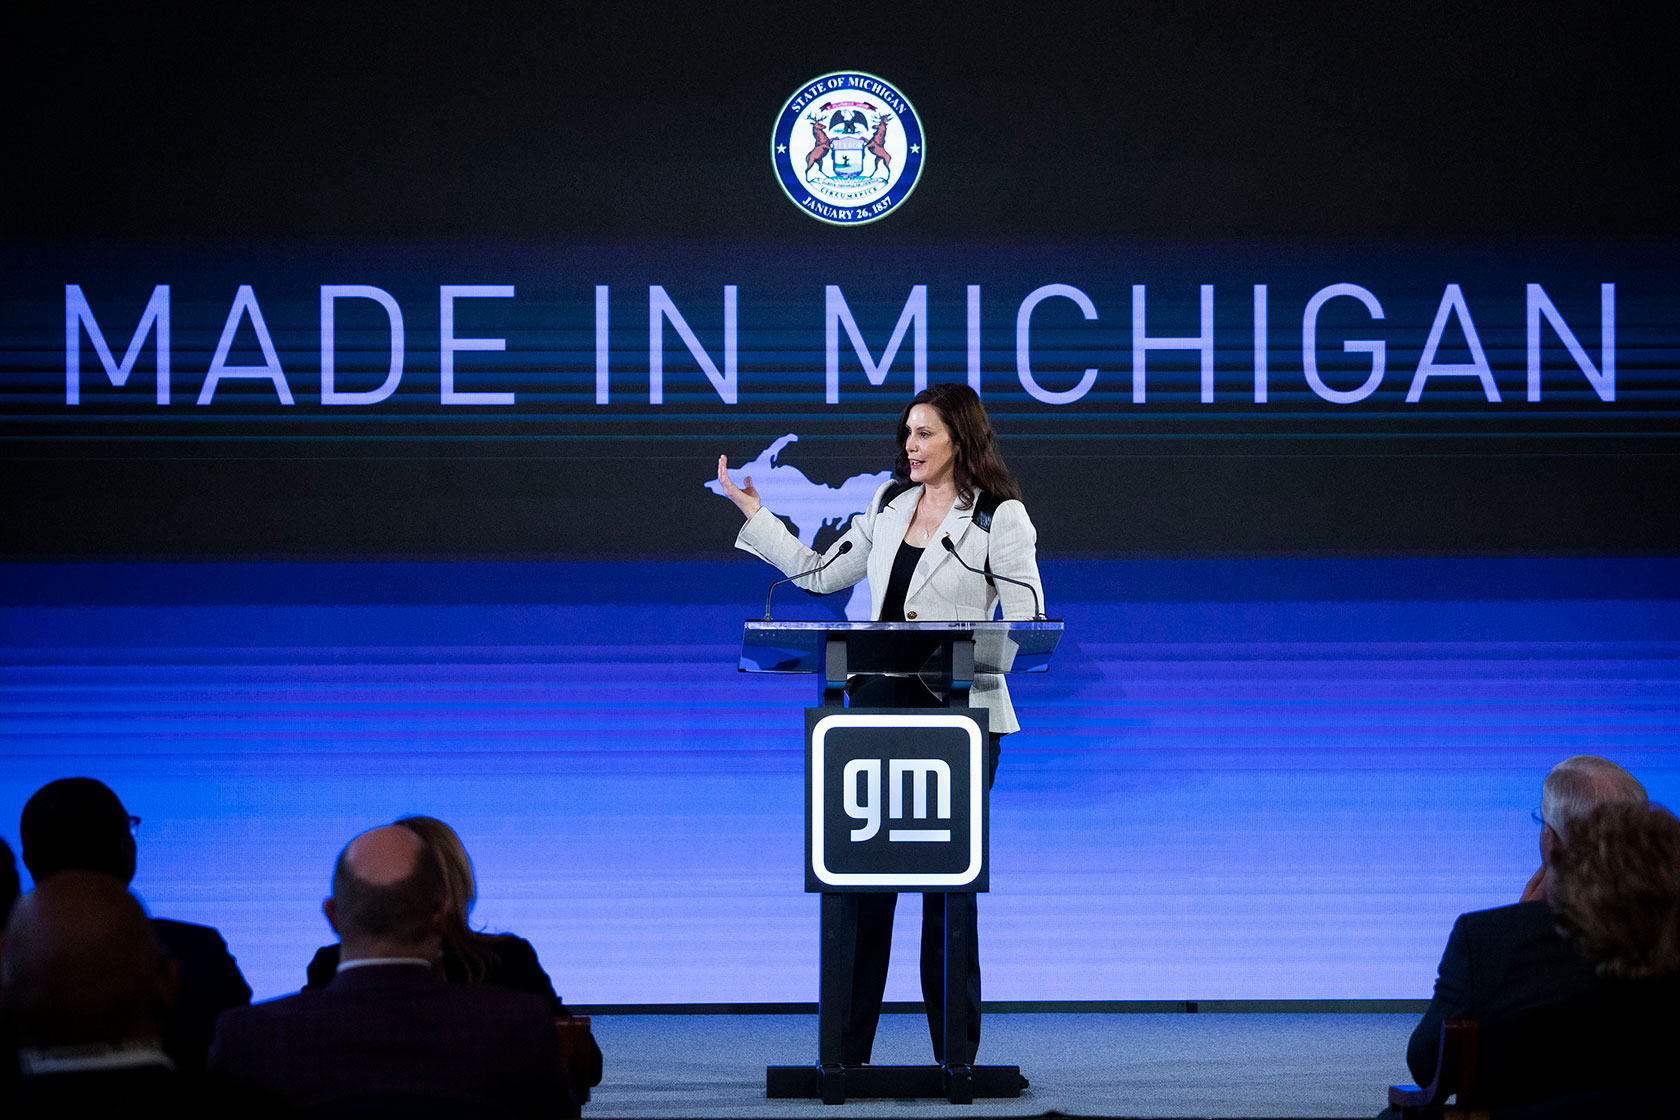 Photo shows Whitmer speaking in front of a large screen that reads 